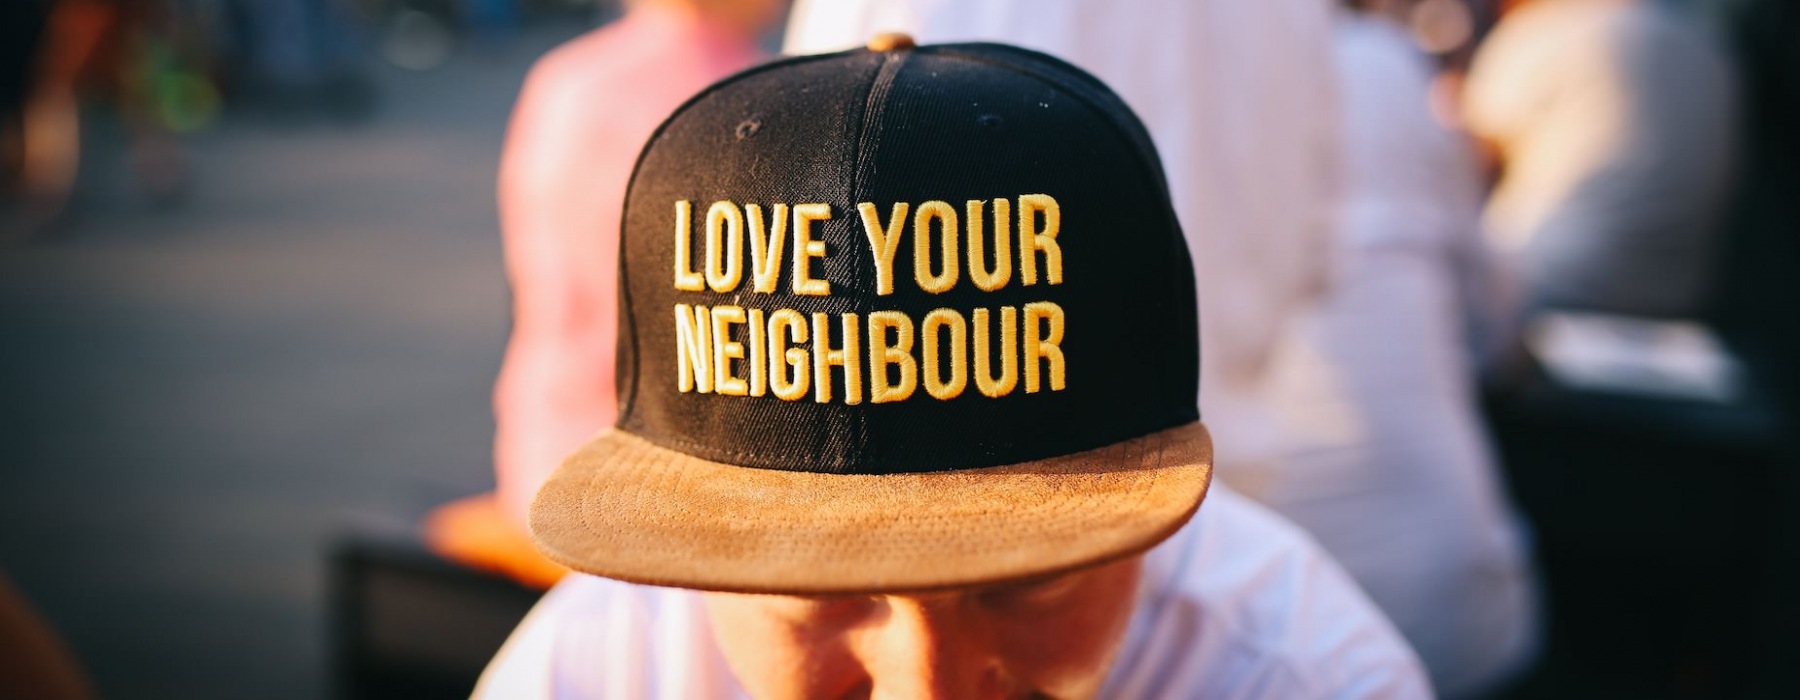 man in black and yellow hat that says Love Your Neighbor